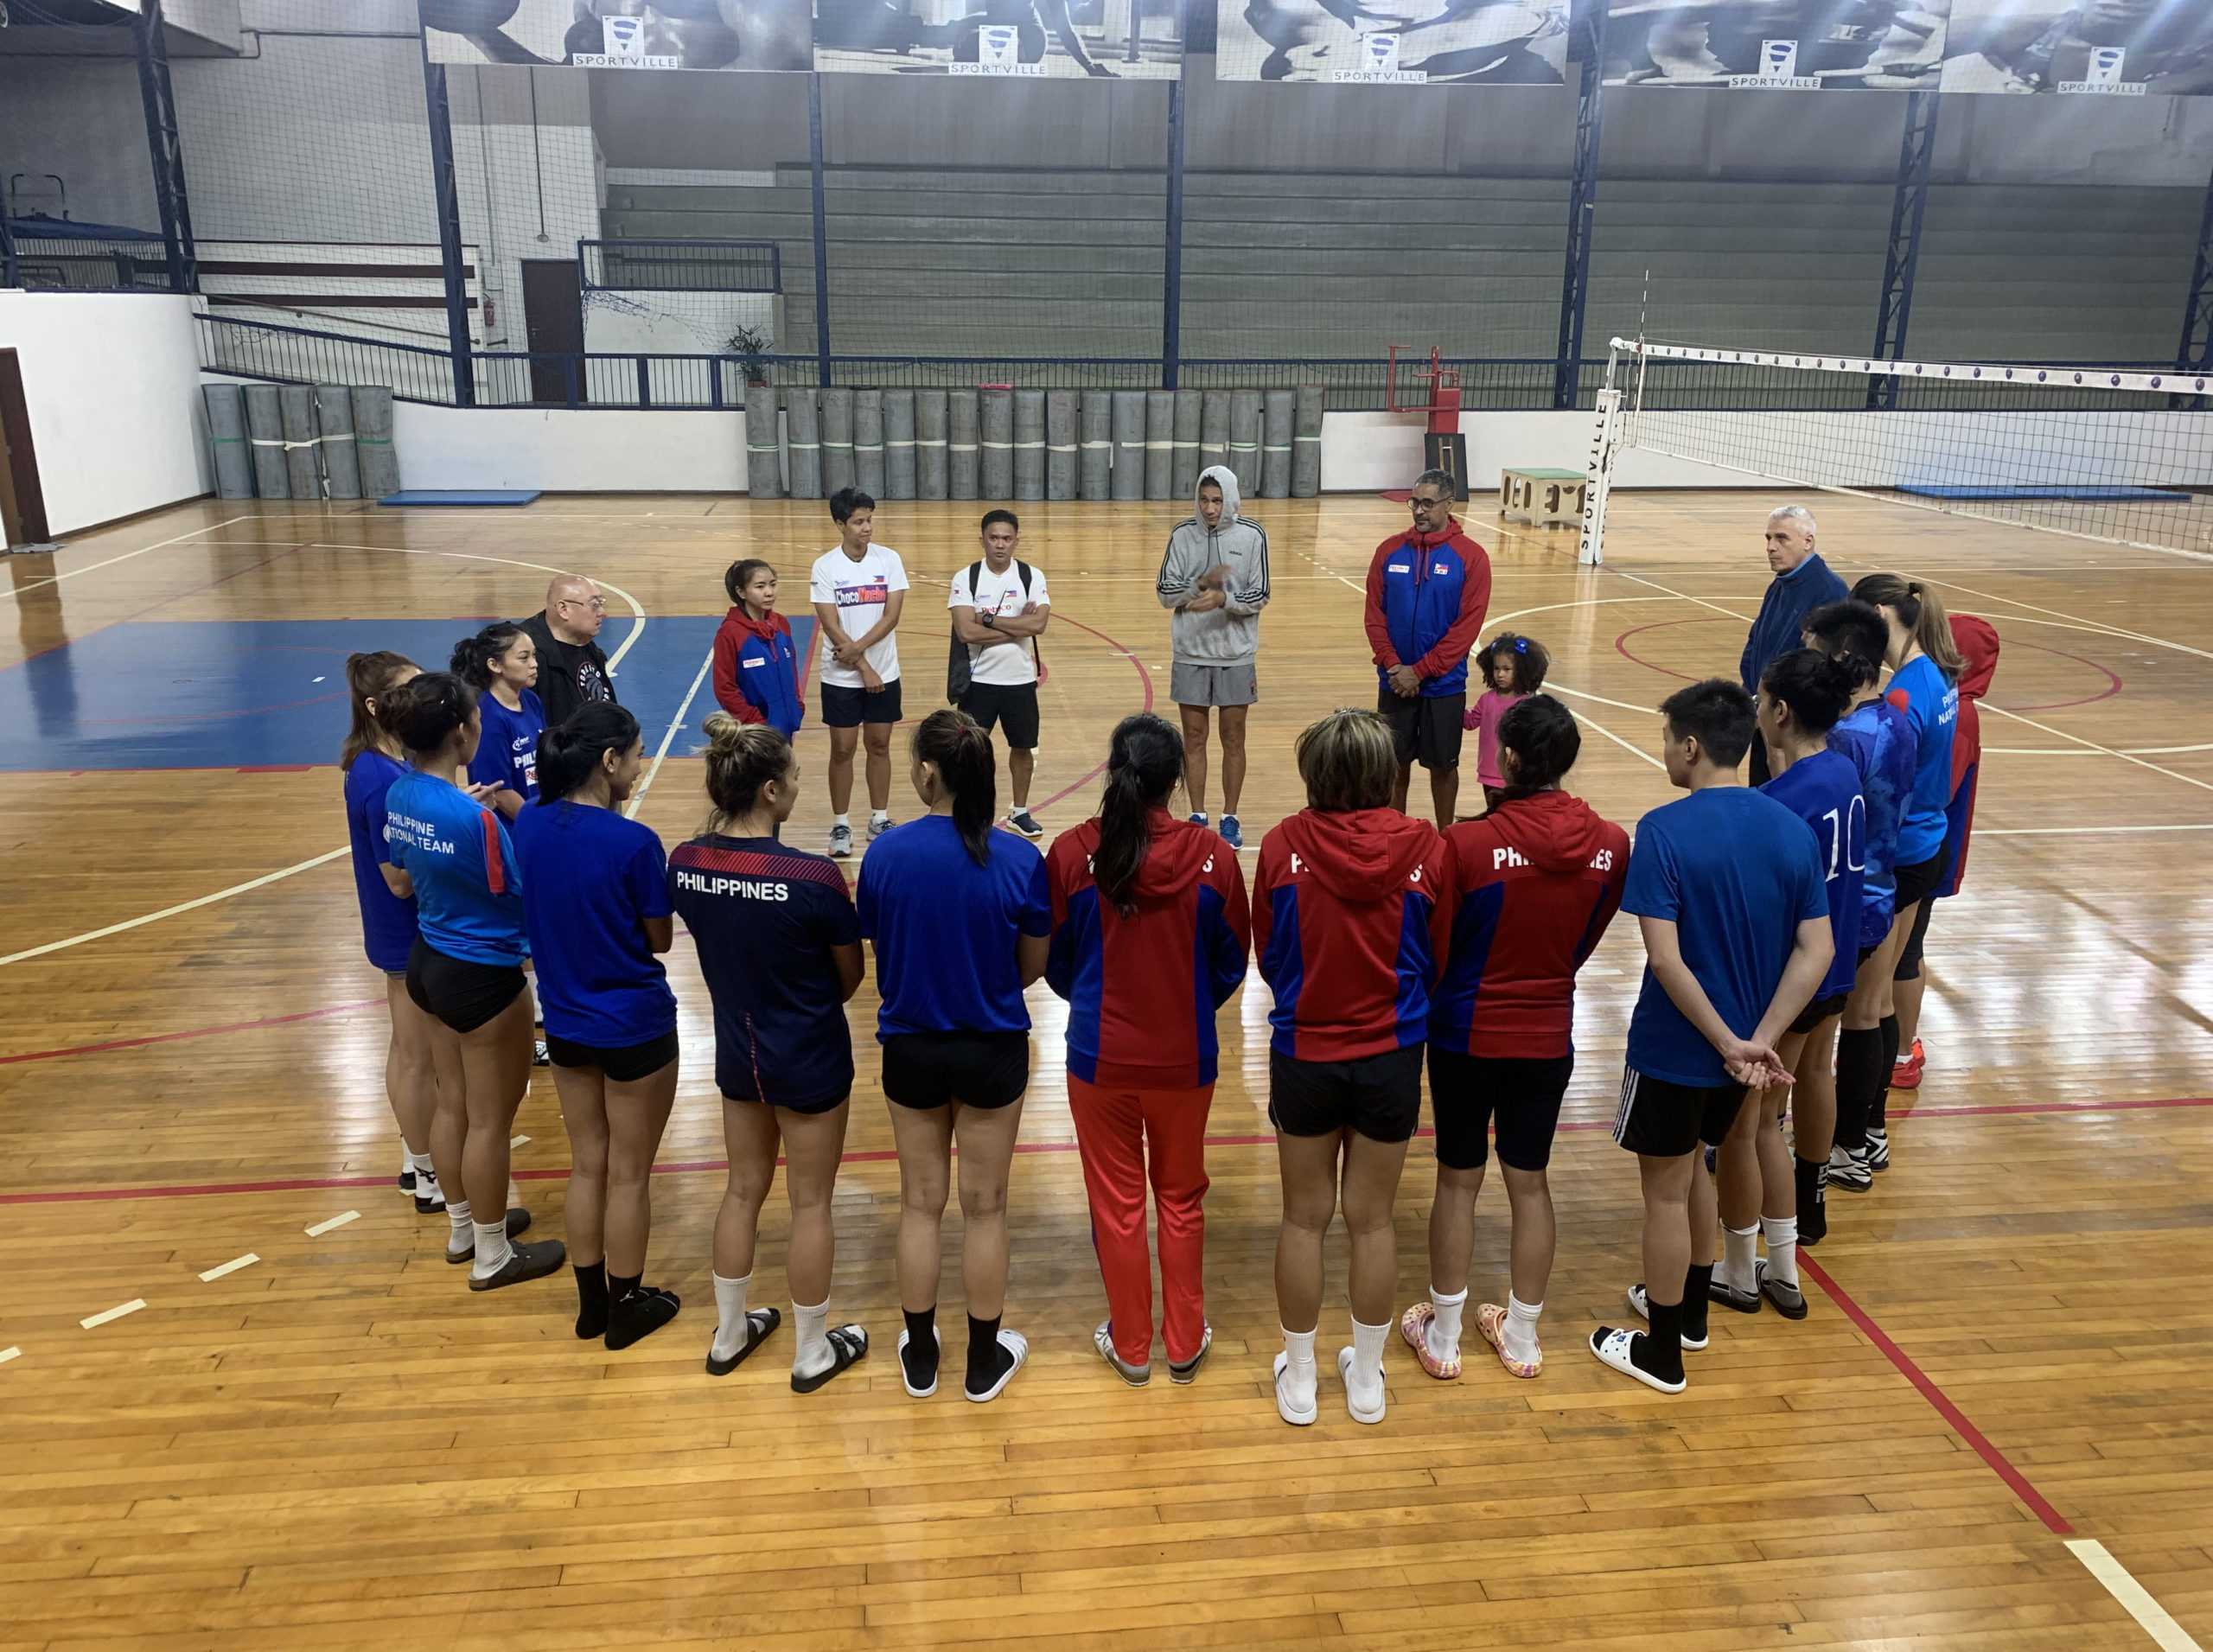 PH women's volleyball team before a practice session on Friday. JUNE NAVARRO/INQUIRER